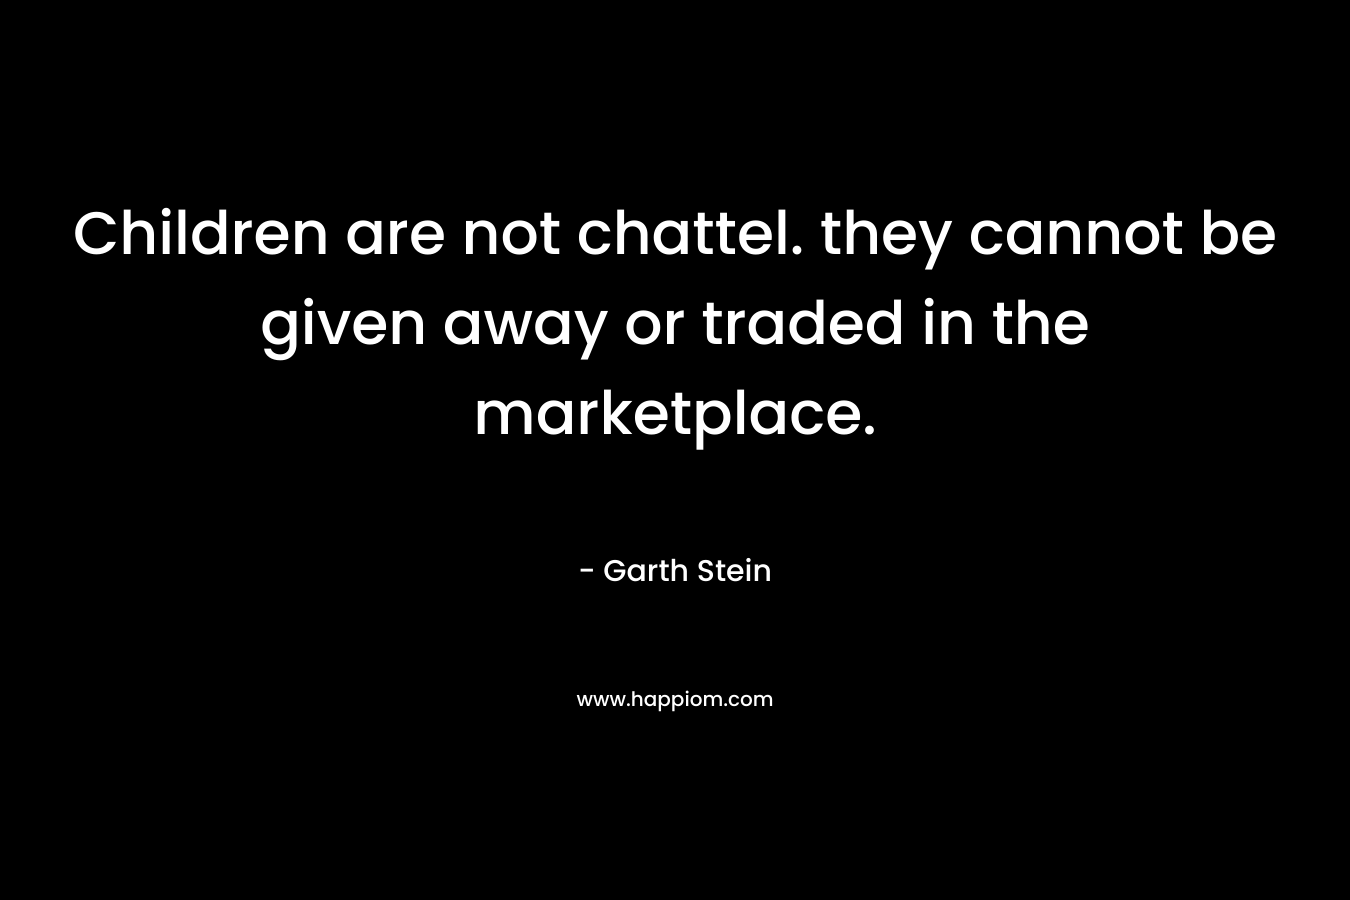 Children are not chattel. they cannot be given away or traded in the marketplace.